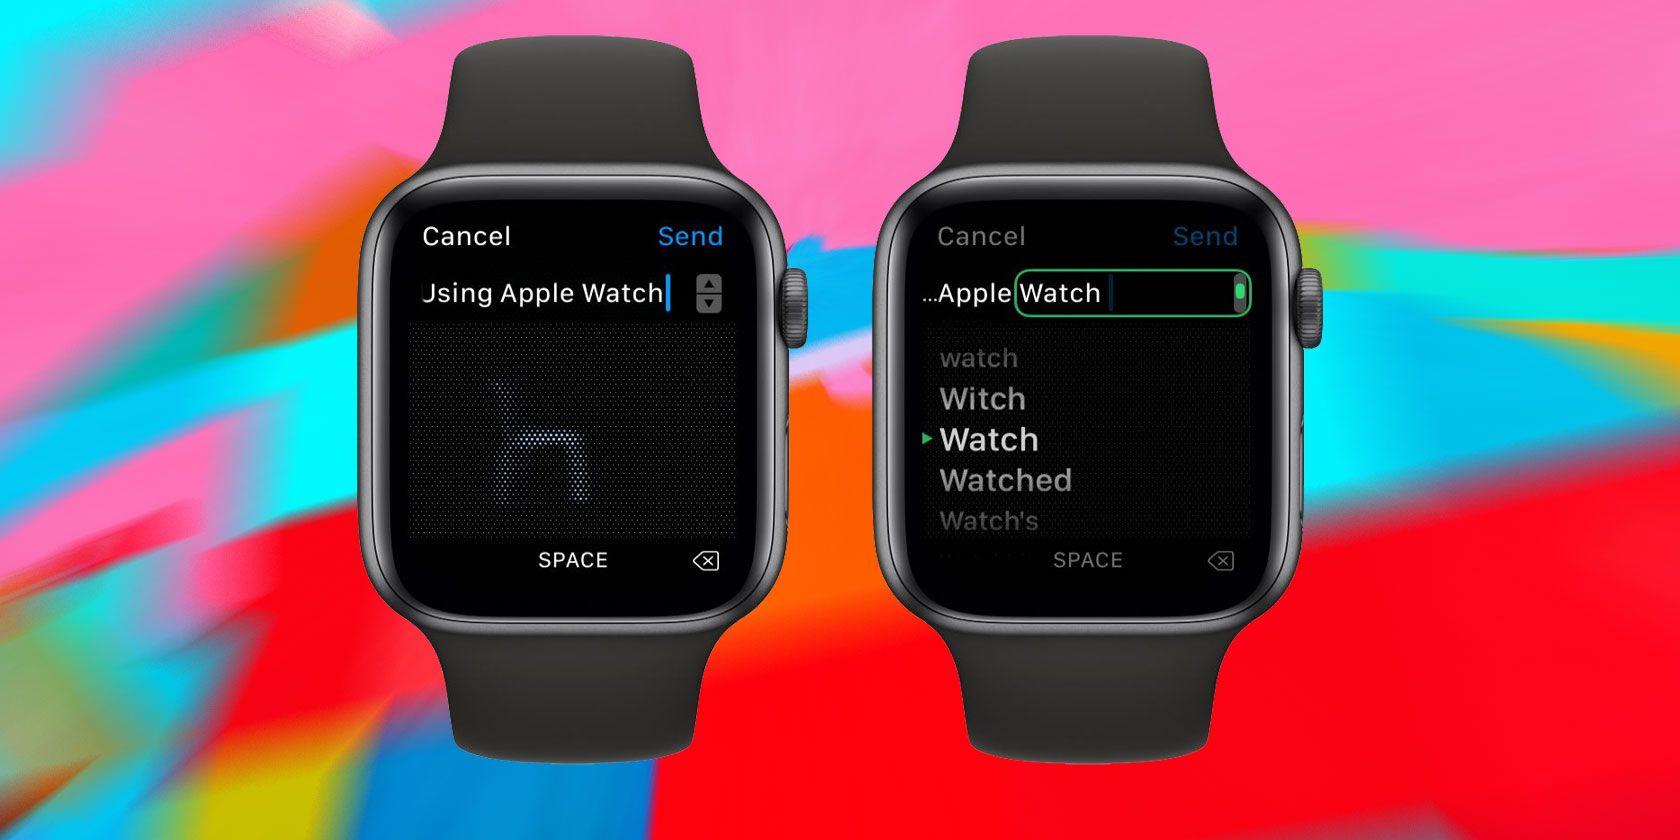 How to create, edit, and delete default quick replies for Apple Watch